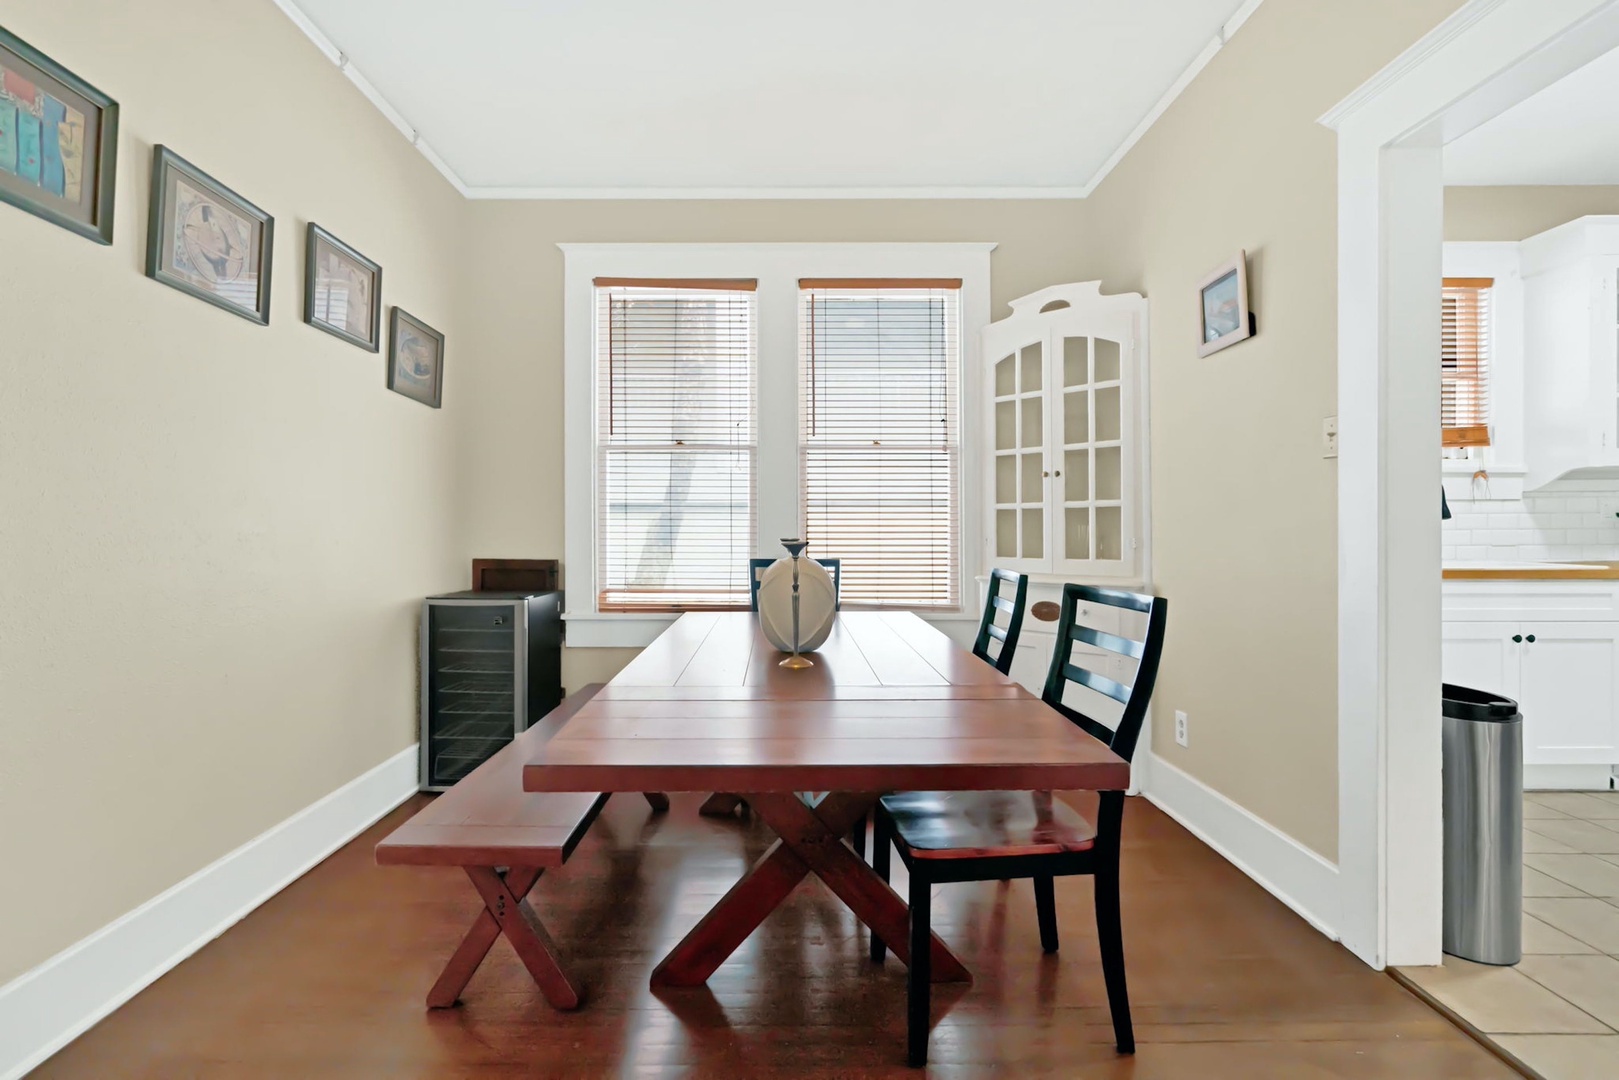 Enjoy meals together at the dining table, with seating for 6